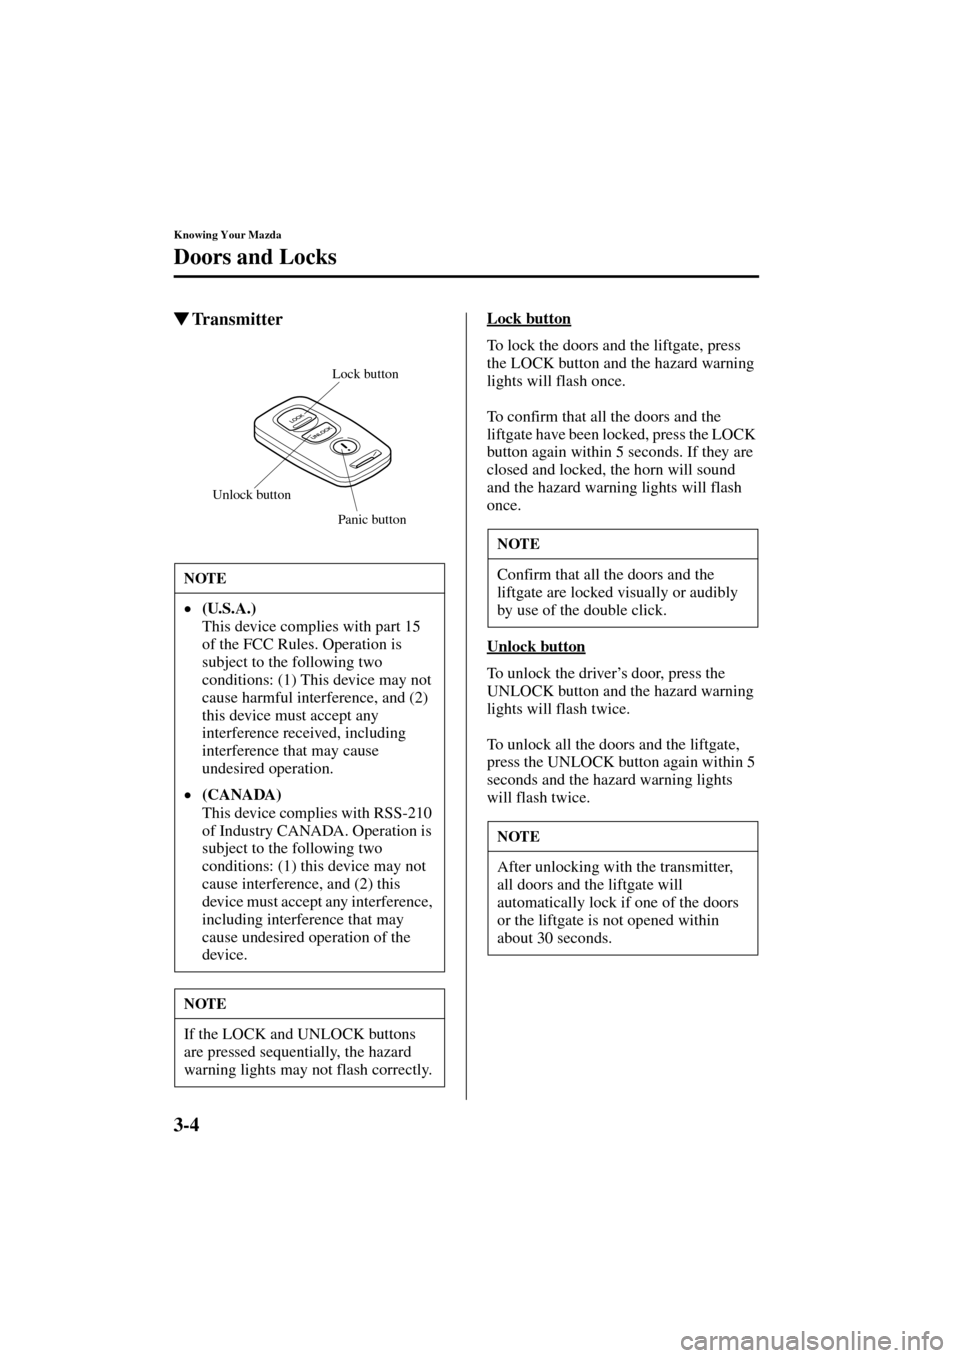 MAZDA MODEL 3 HATCHBACK 2004  Owners Manual (in English) 3-4
Knowing Your Mazda
Doors and Locks
Form No. 8S18-EA-03I
TransmitterLock button
To lock the doors and the liftgate, press 
the LOCK button and the hazard warning 
lights will flash once.
To confir